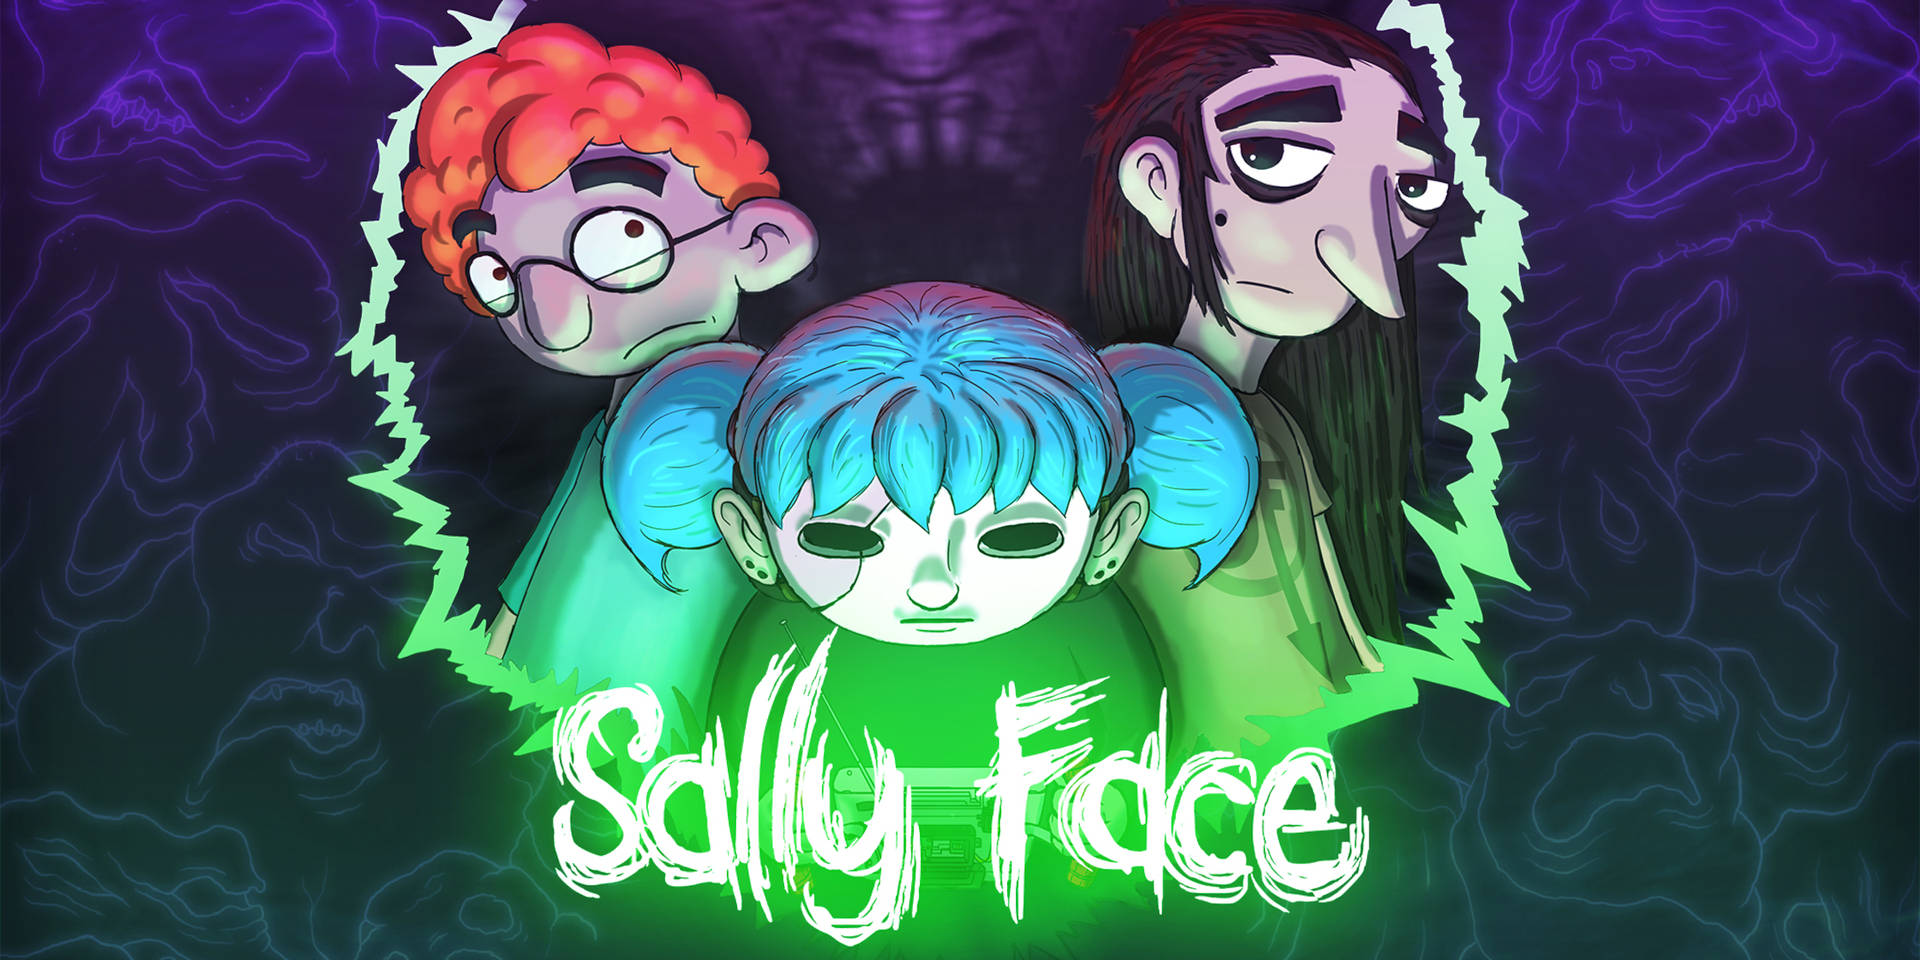 Sally Face, Todd Morrison, And Larry Johnson Background